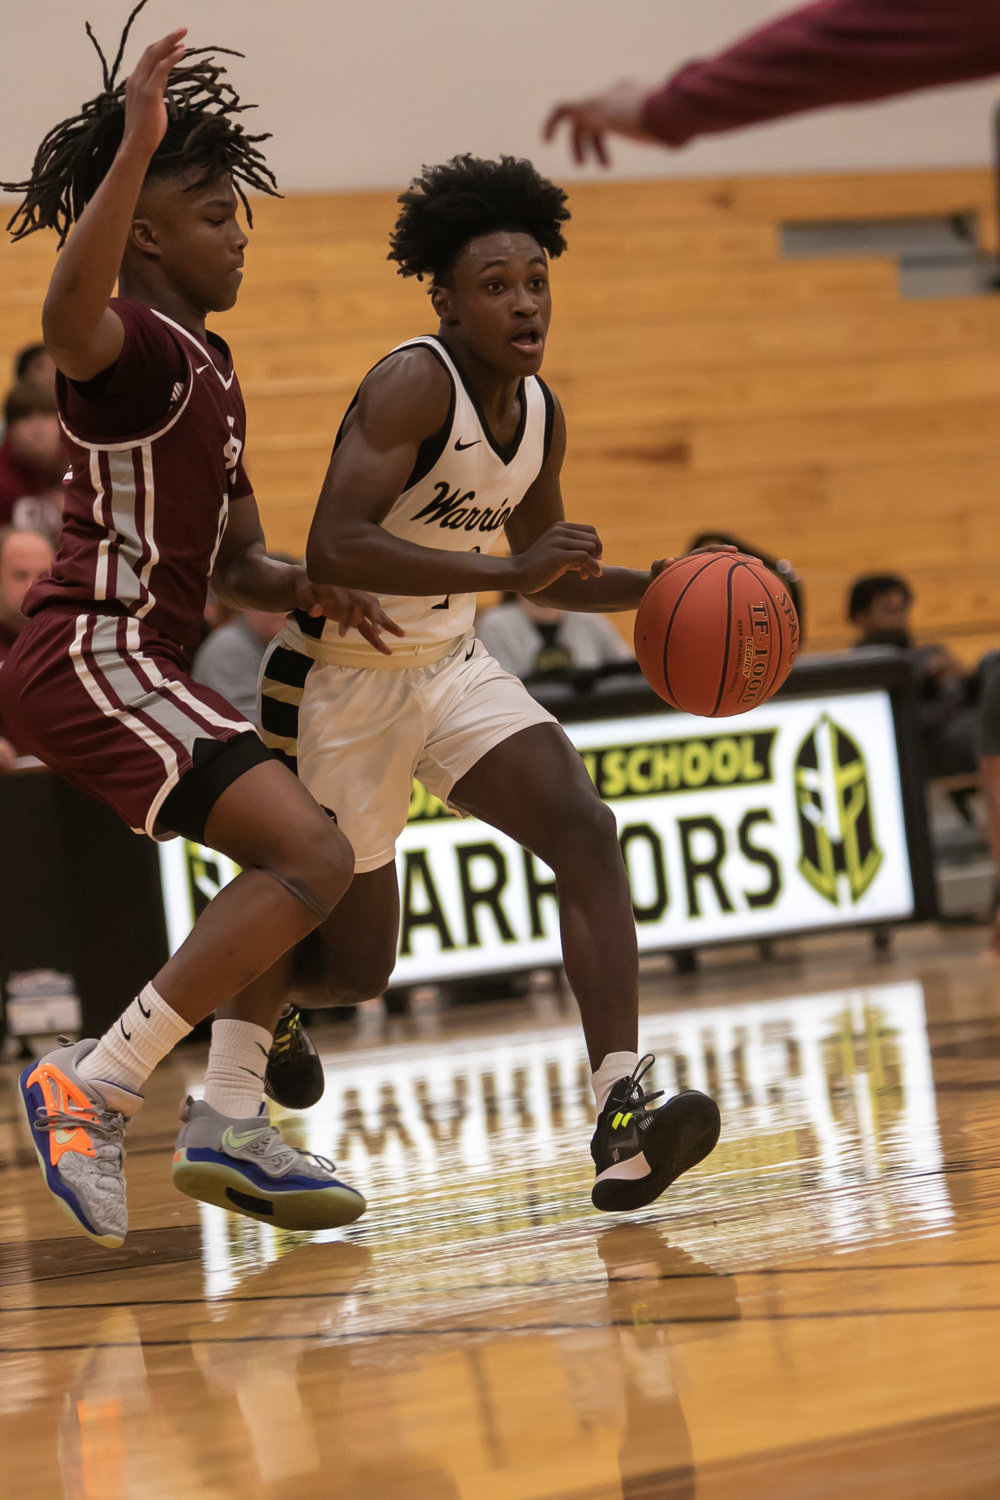 Jaden Holt drives past a defender during Tuesday's game between Cinco Ranch and Jordan at the Jordan gym.